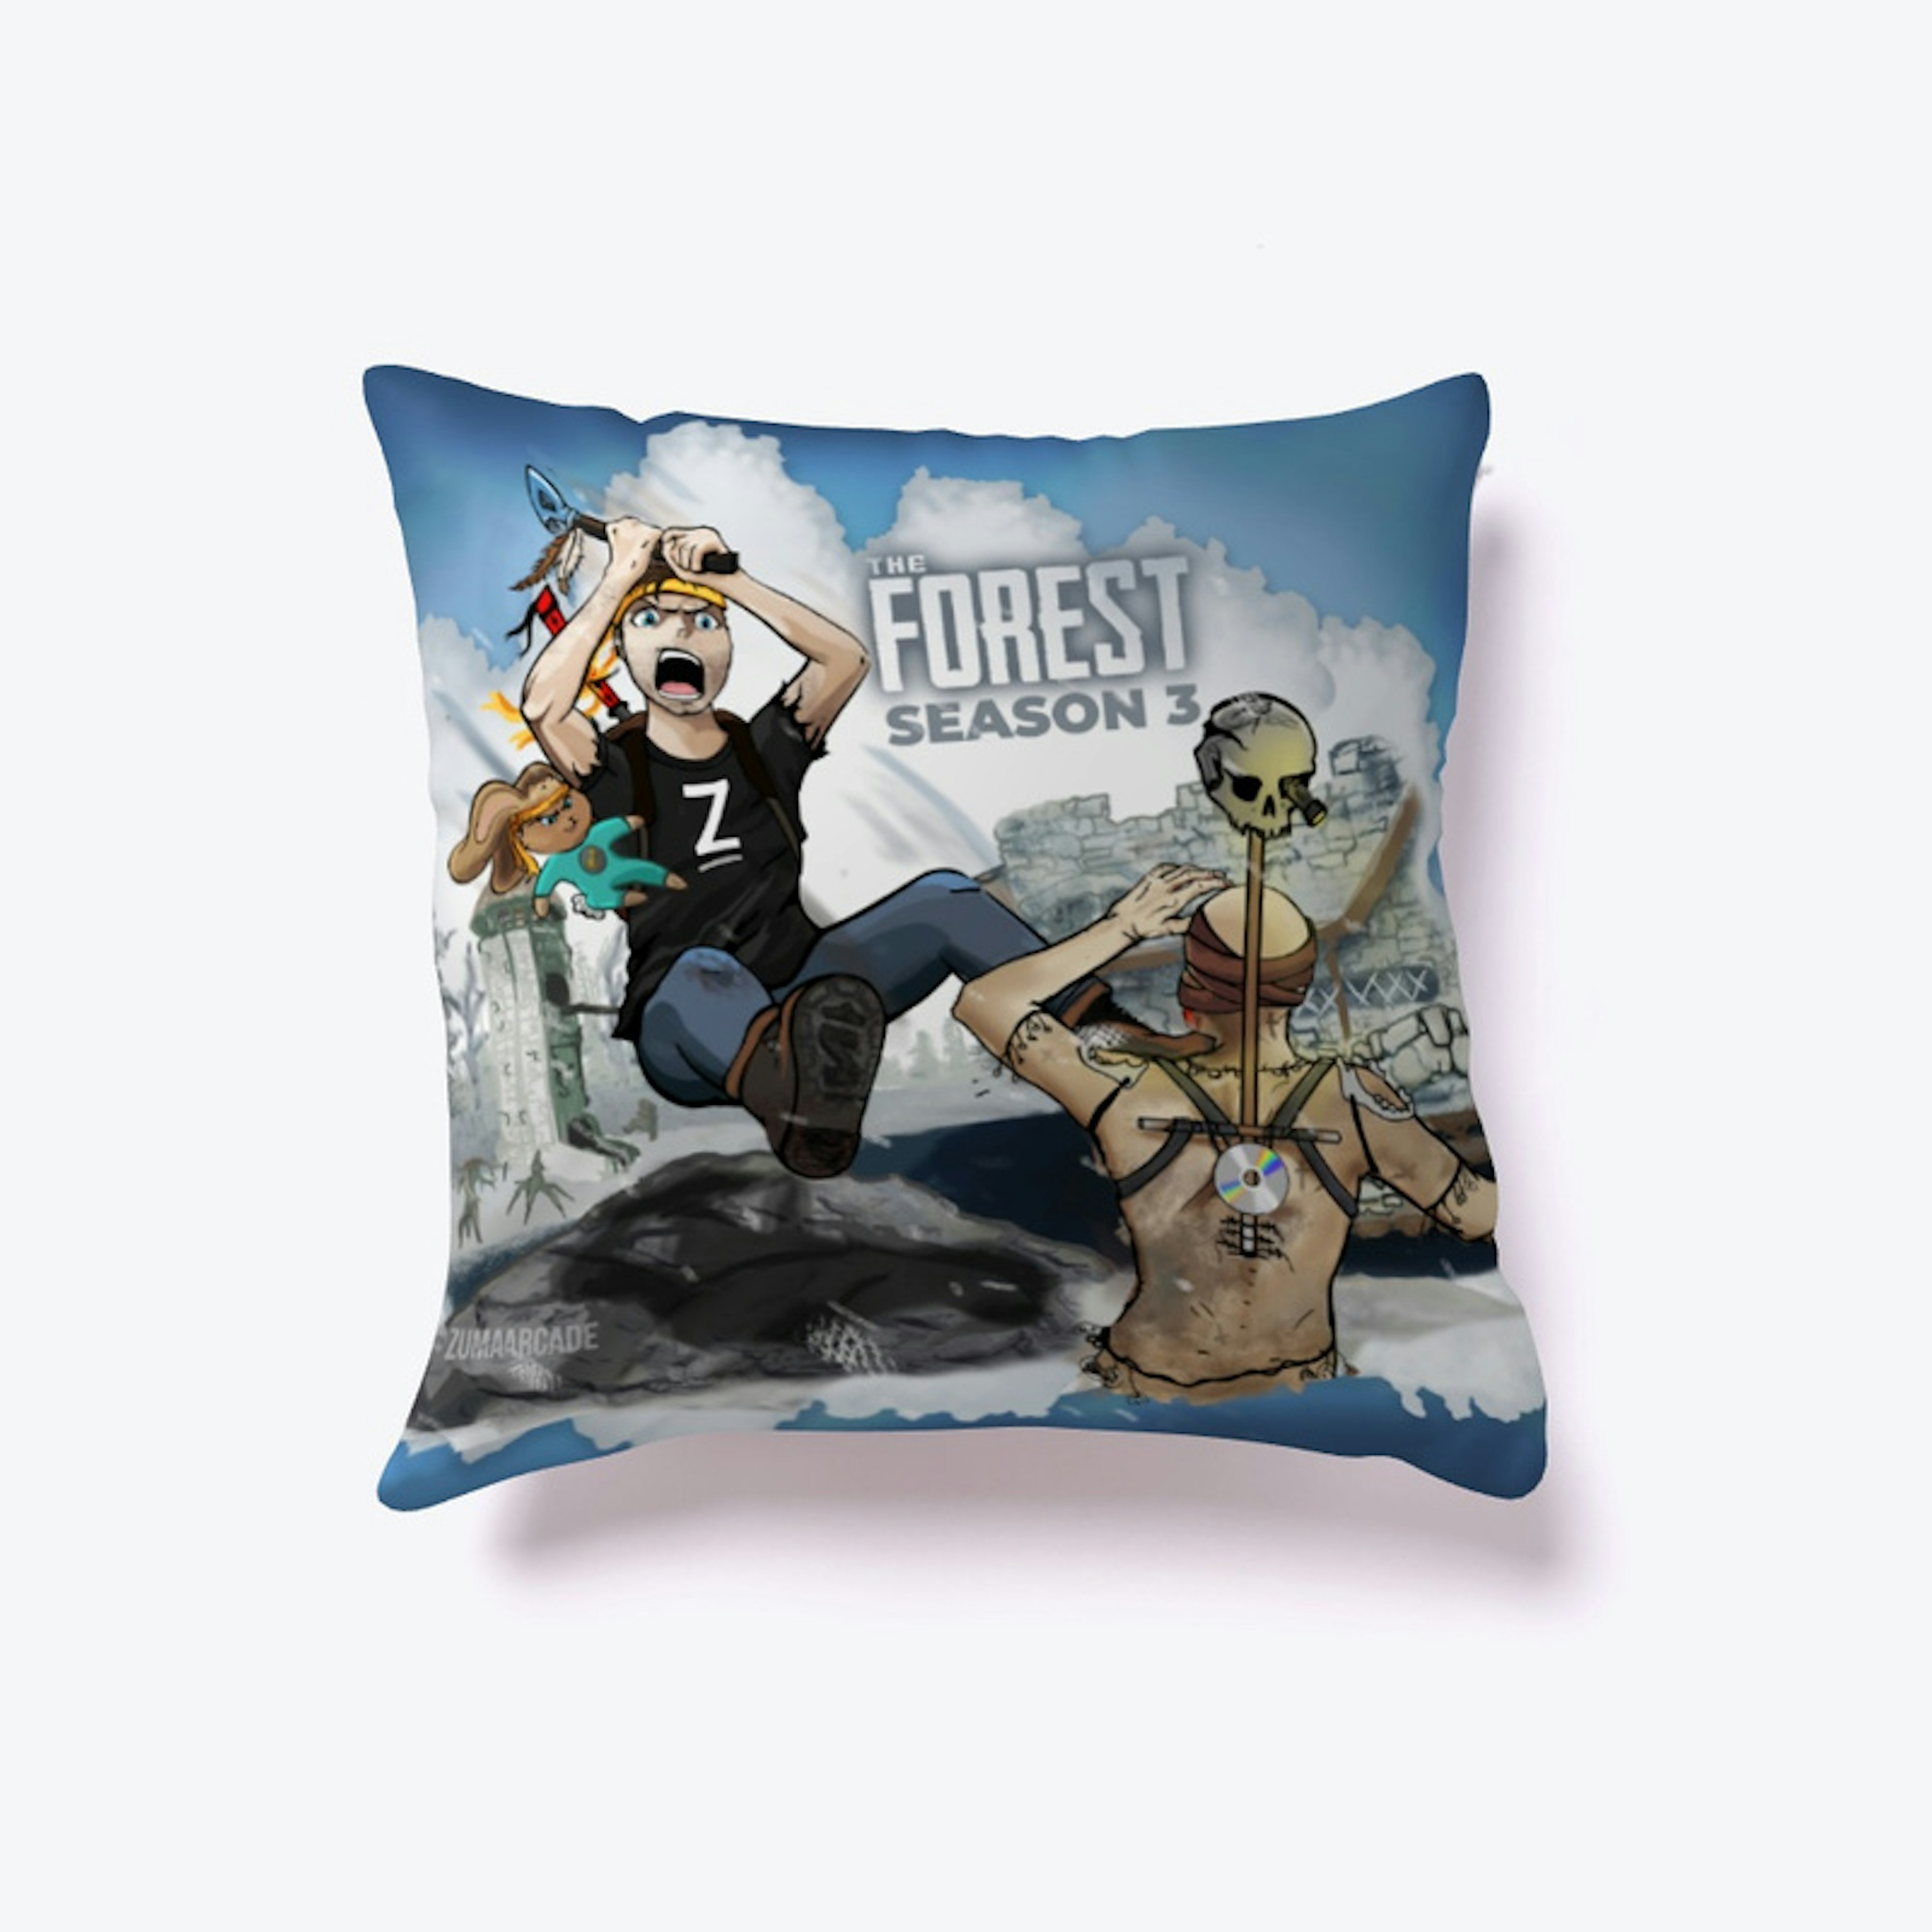 The Forest Cushion